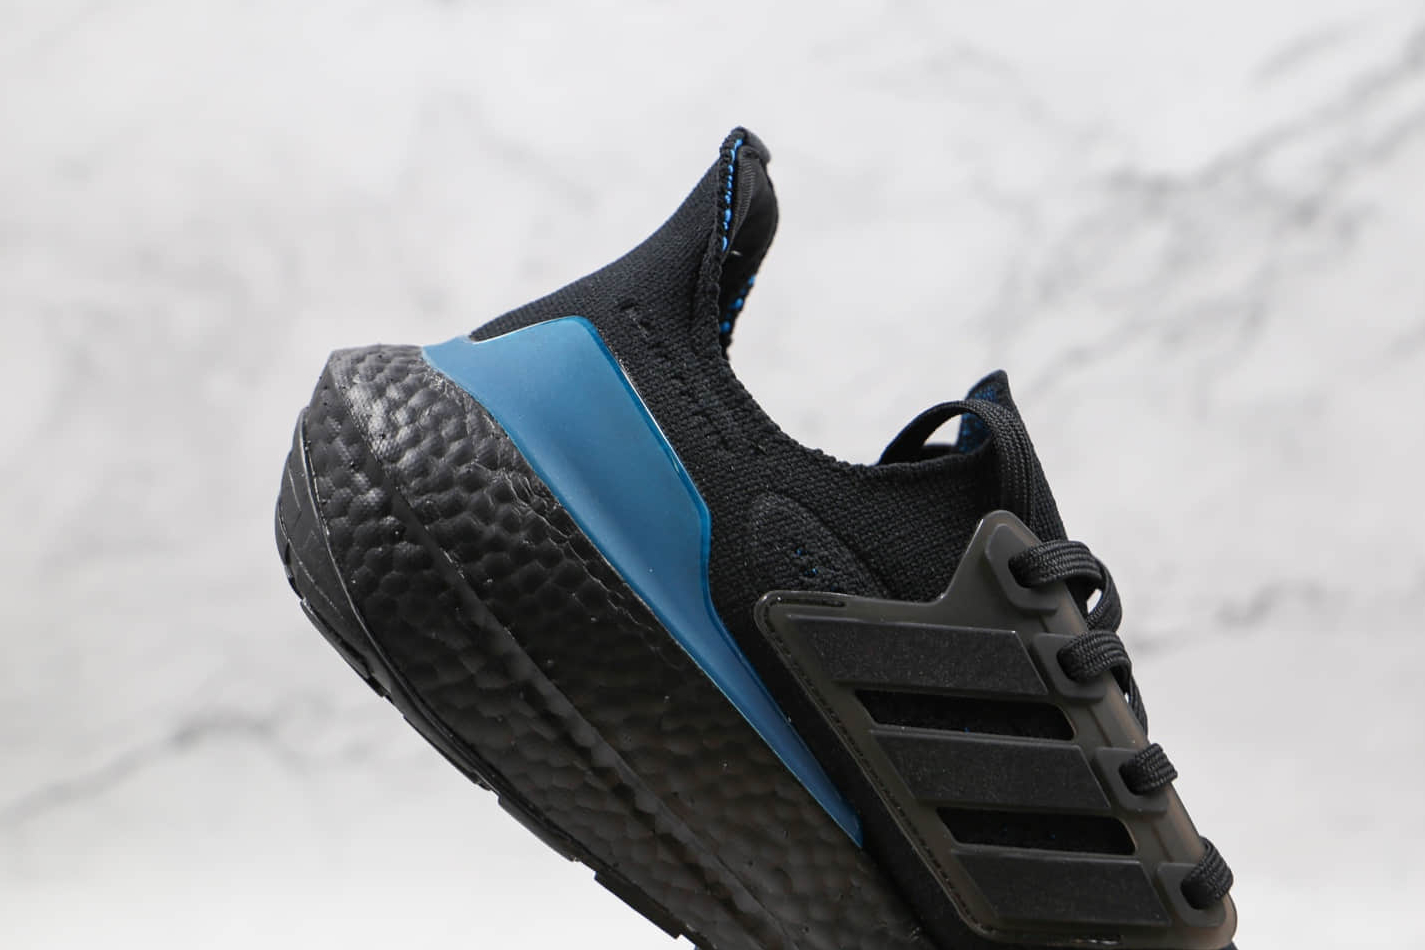 Adidas UltraBoost 21 Black Active Teal FZ1921 - Stylish and High-Performance Running Shoes